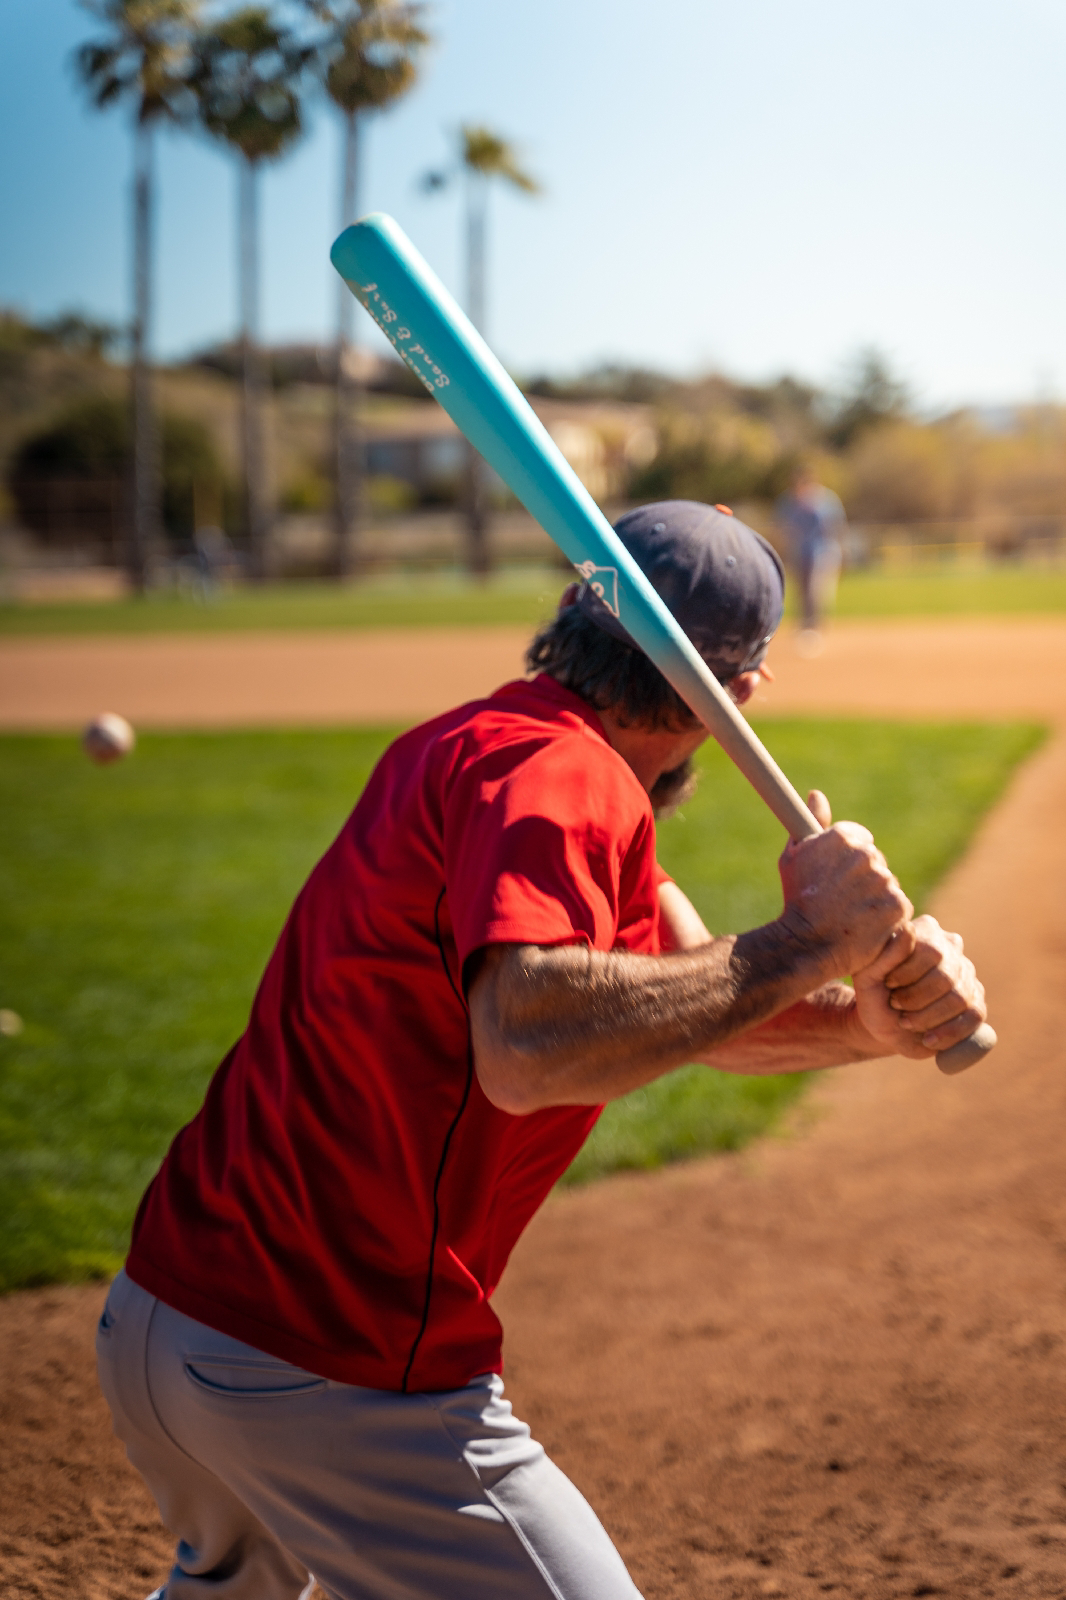 Ron andante taking live bp with his 805 bat